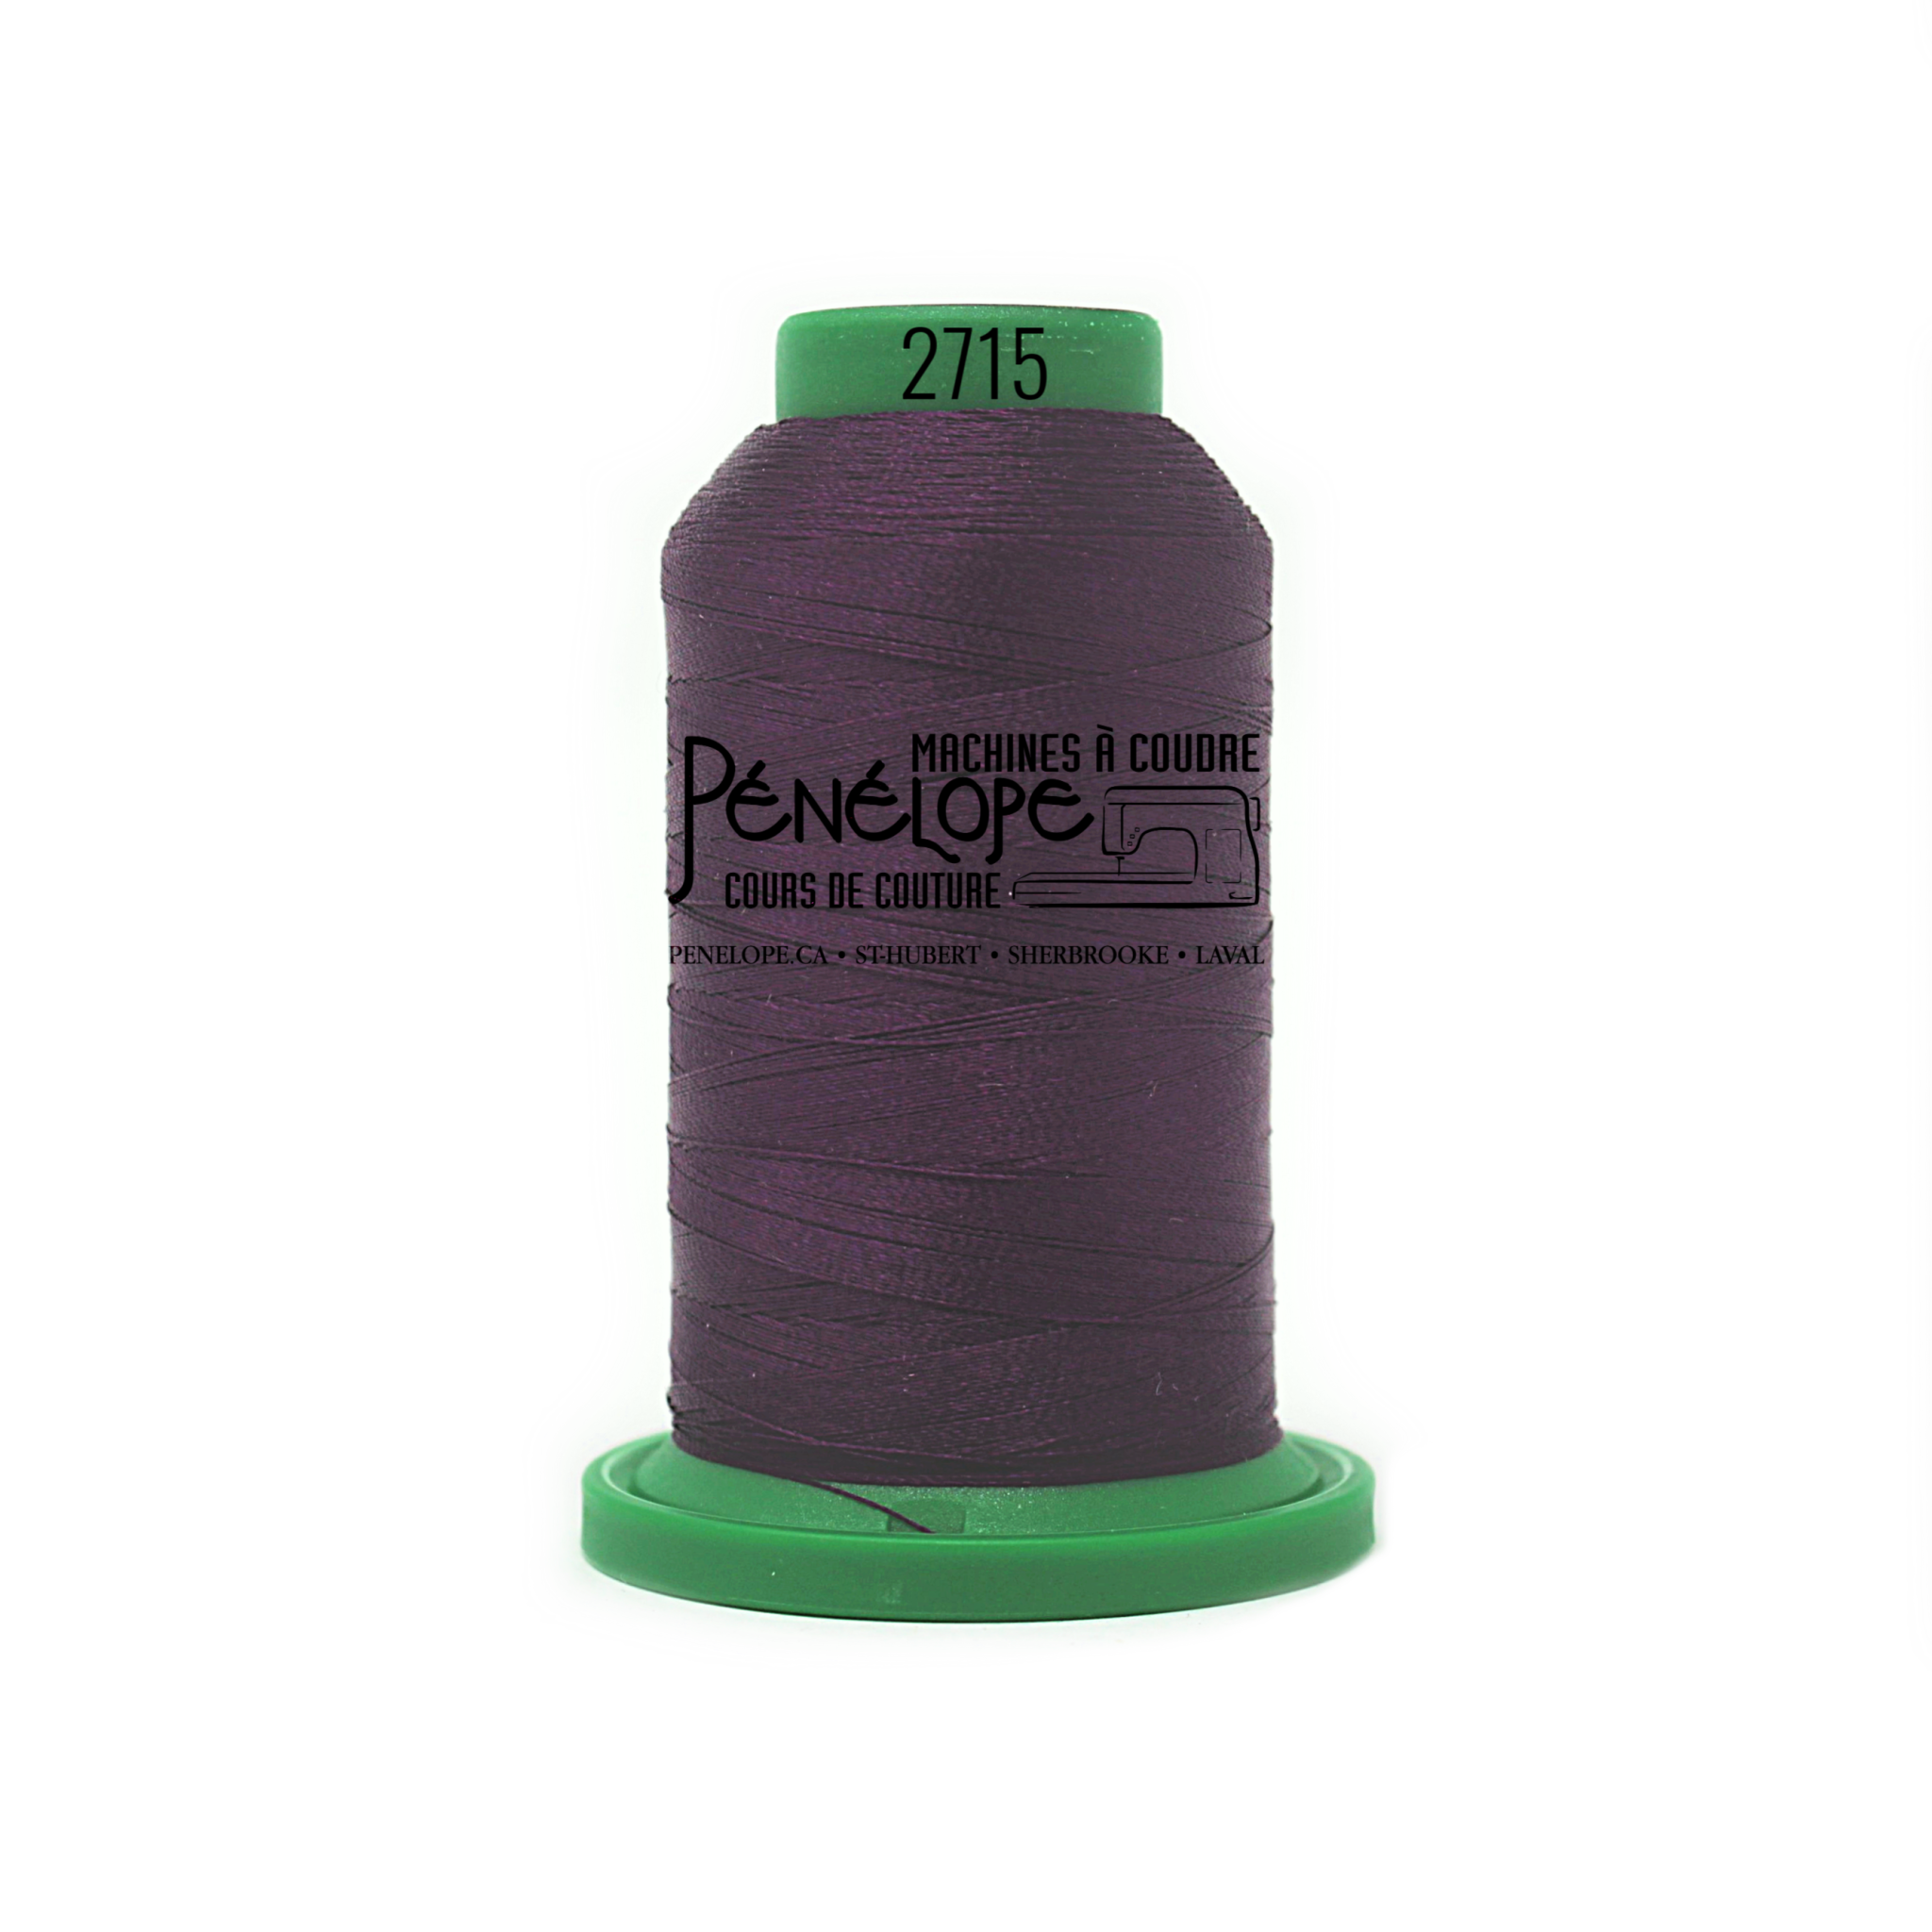 Isacord Isacord sewing and embroidery thread 2715